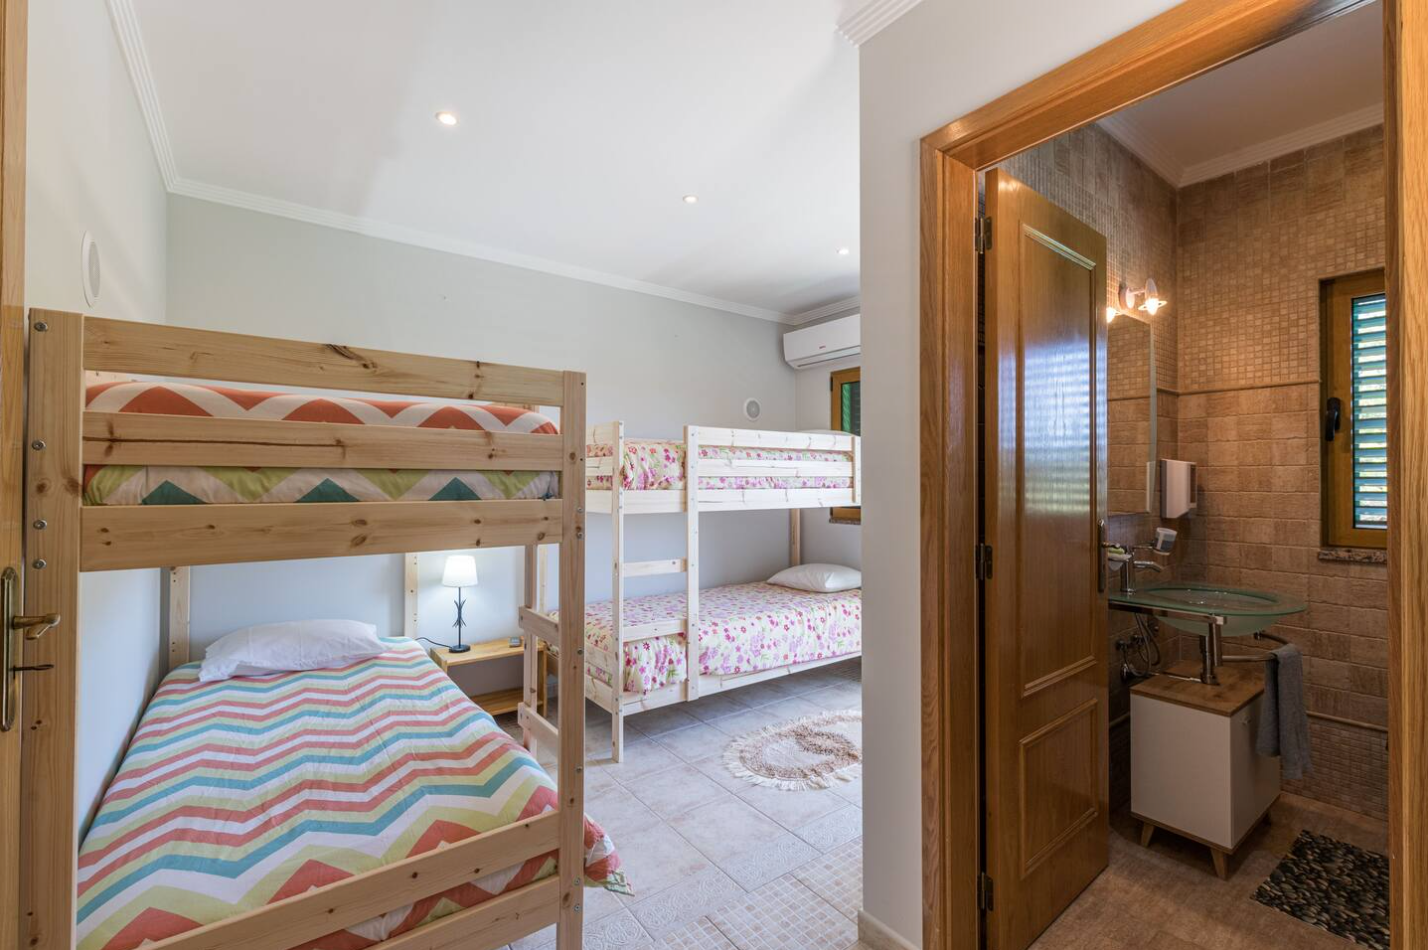 Shared Room With Twin or Bunk Beds >>> Partial Payment Option Available